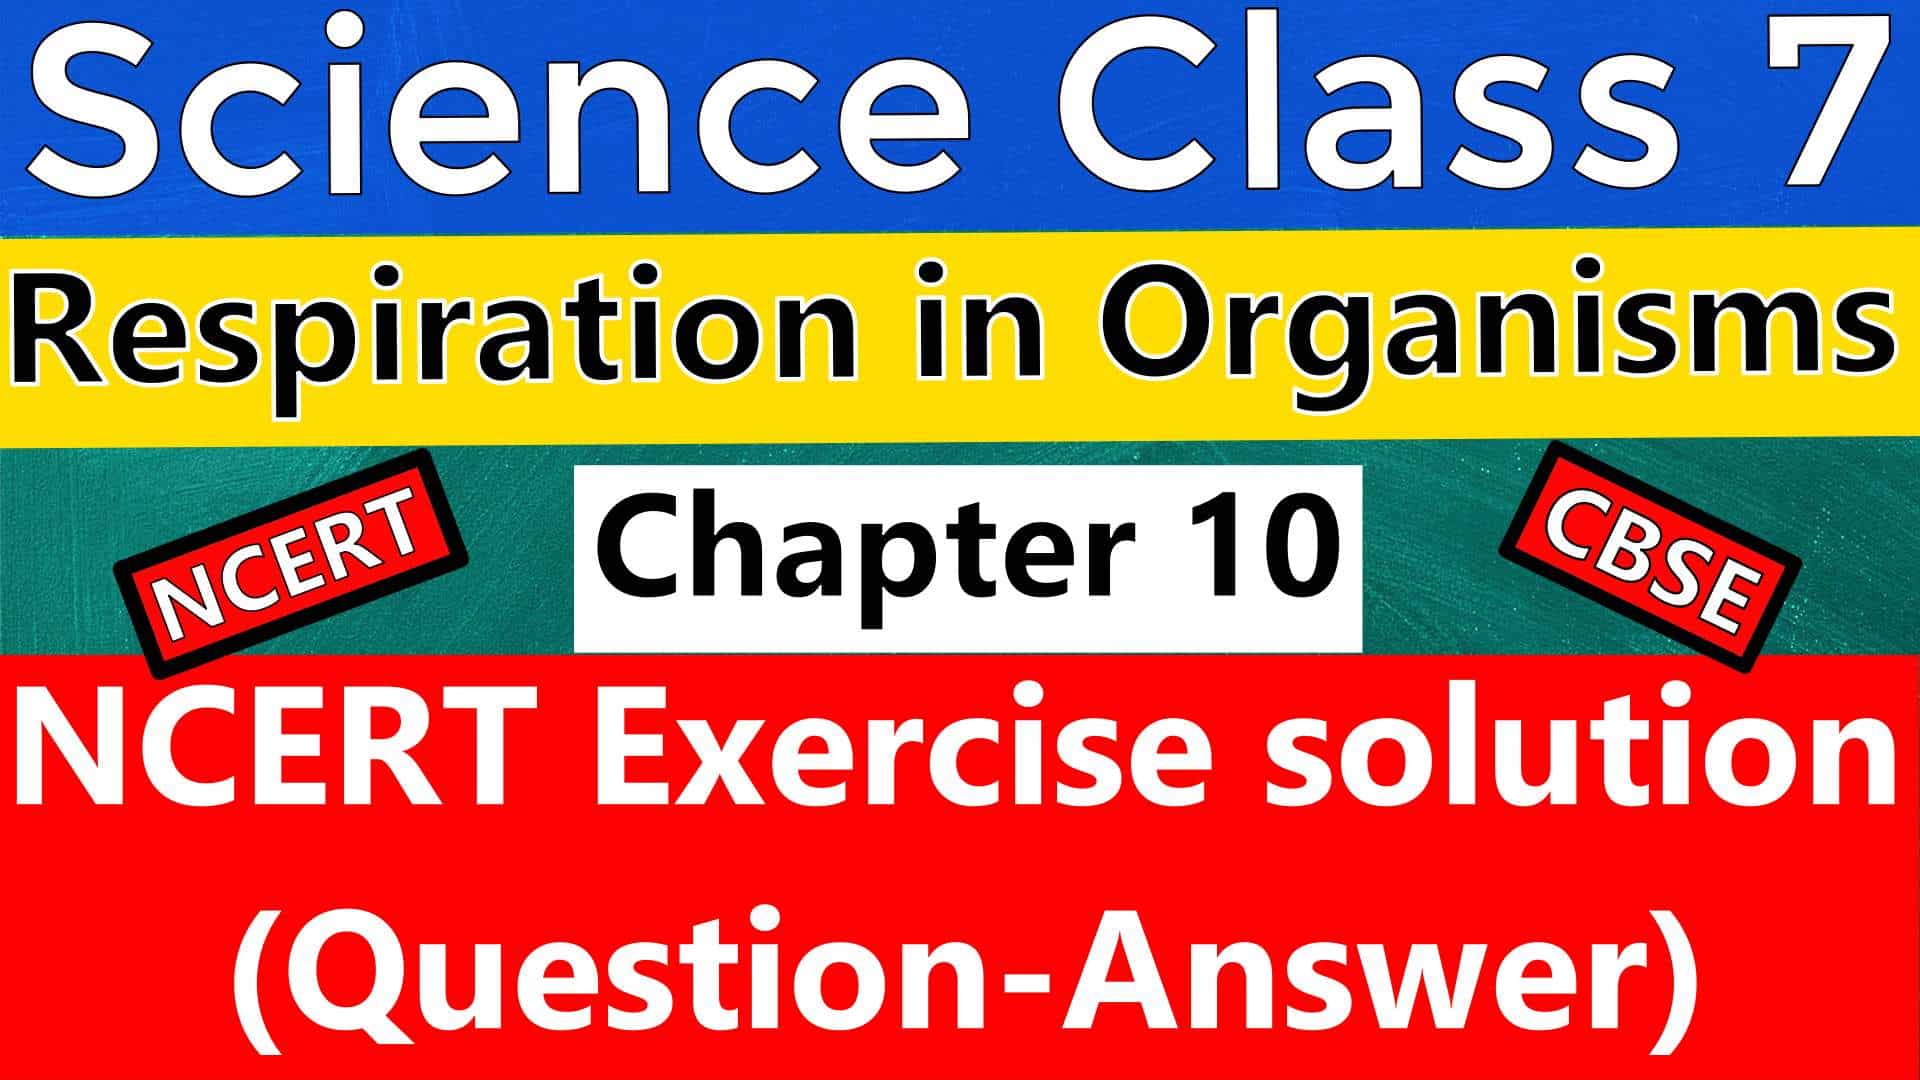 Science Class 7 Chapter 10 Respiration in Organisms - NCERT Exercise Solution (Question-Answer)